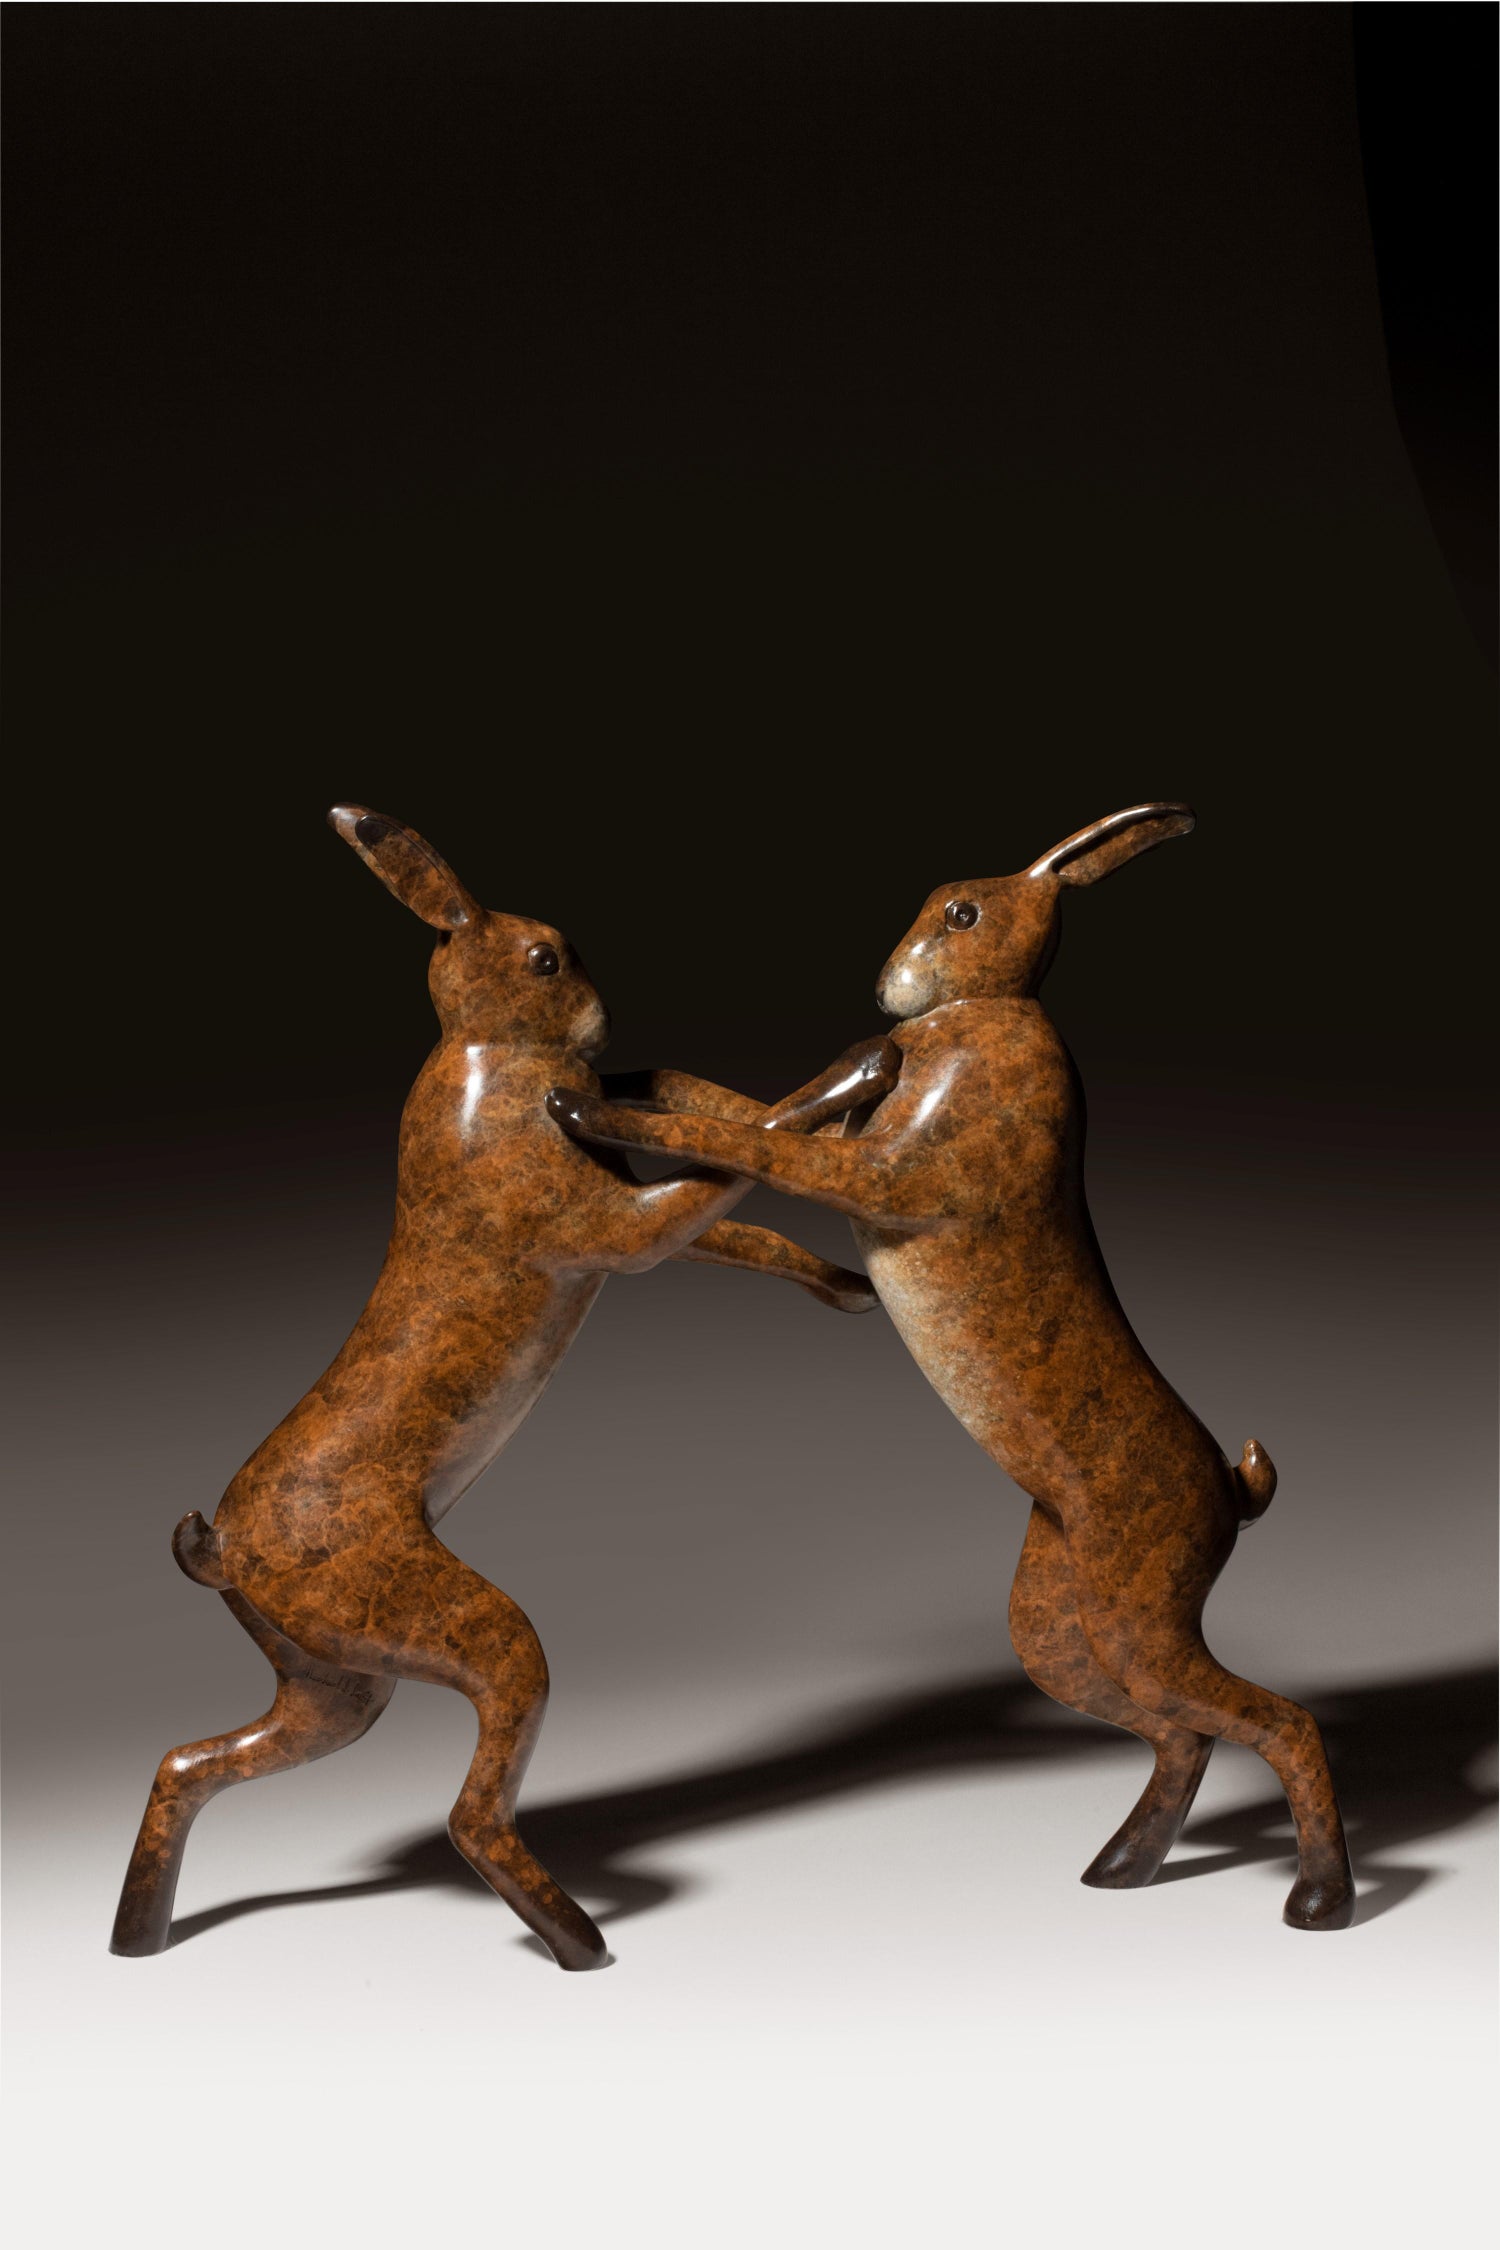 Richard Smith b.1955 - 'Boxing Hares' Contemporary Bronze sculpture, brown  Hares Wildlife and Nature For Sale at 1stDibs